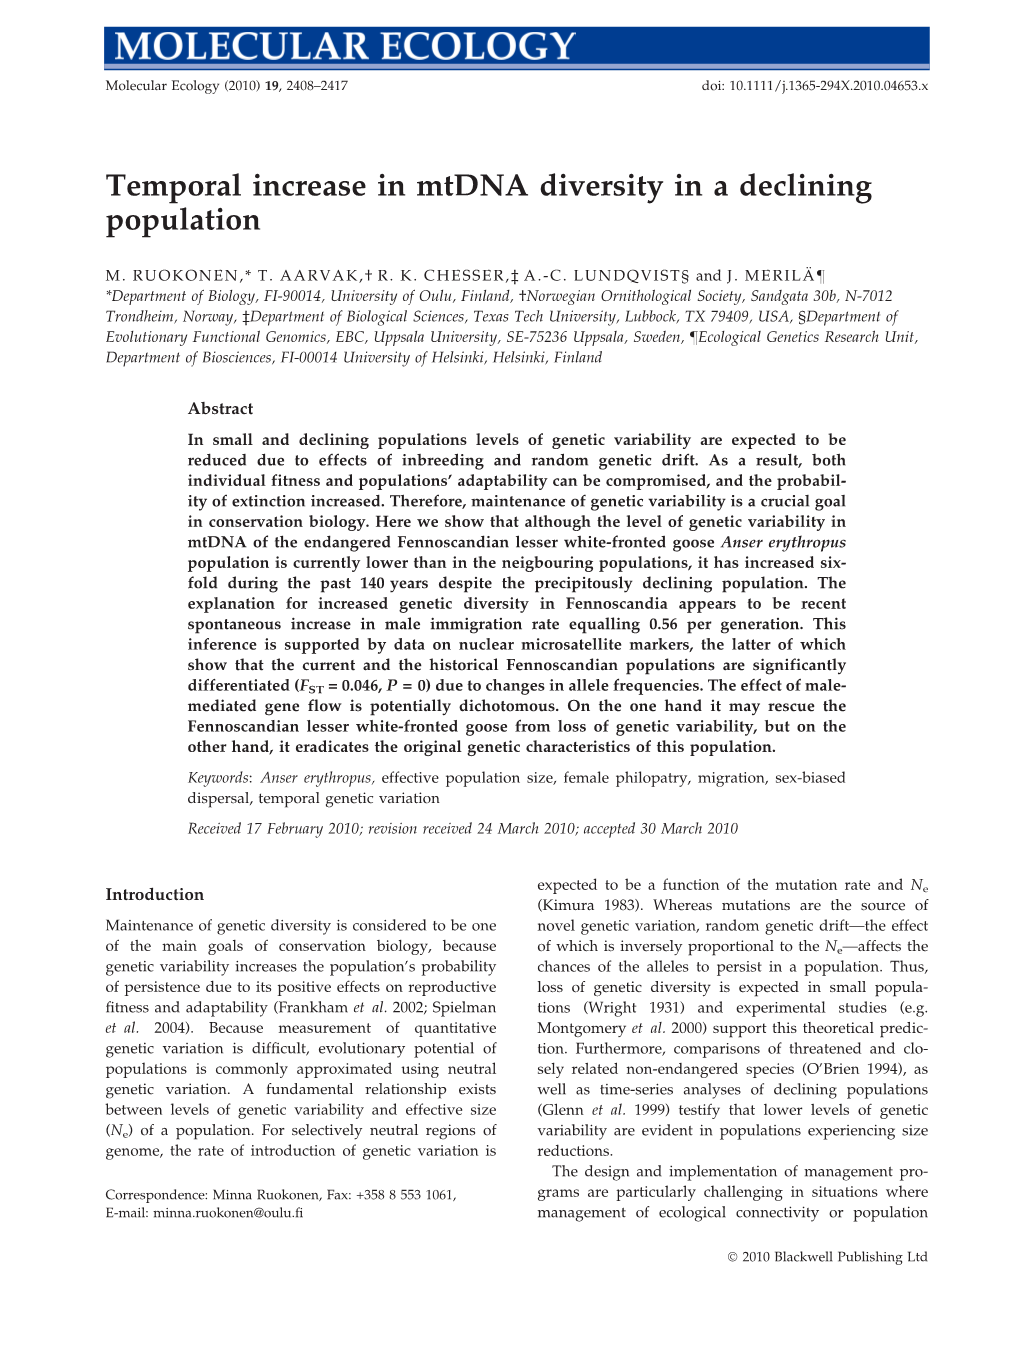 Temporal Increase in Mtdna Diversity in a Declining Population